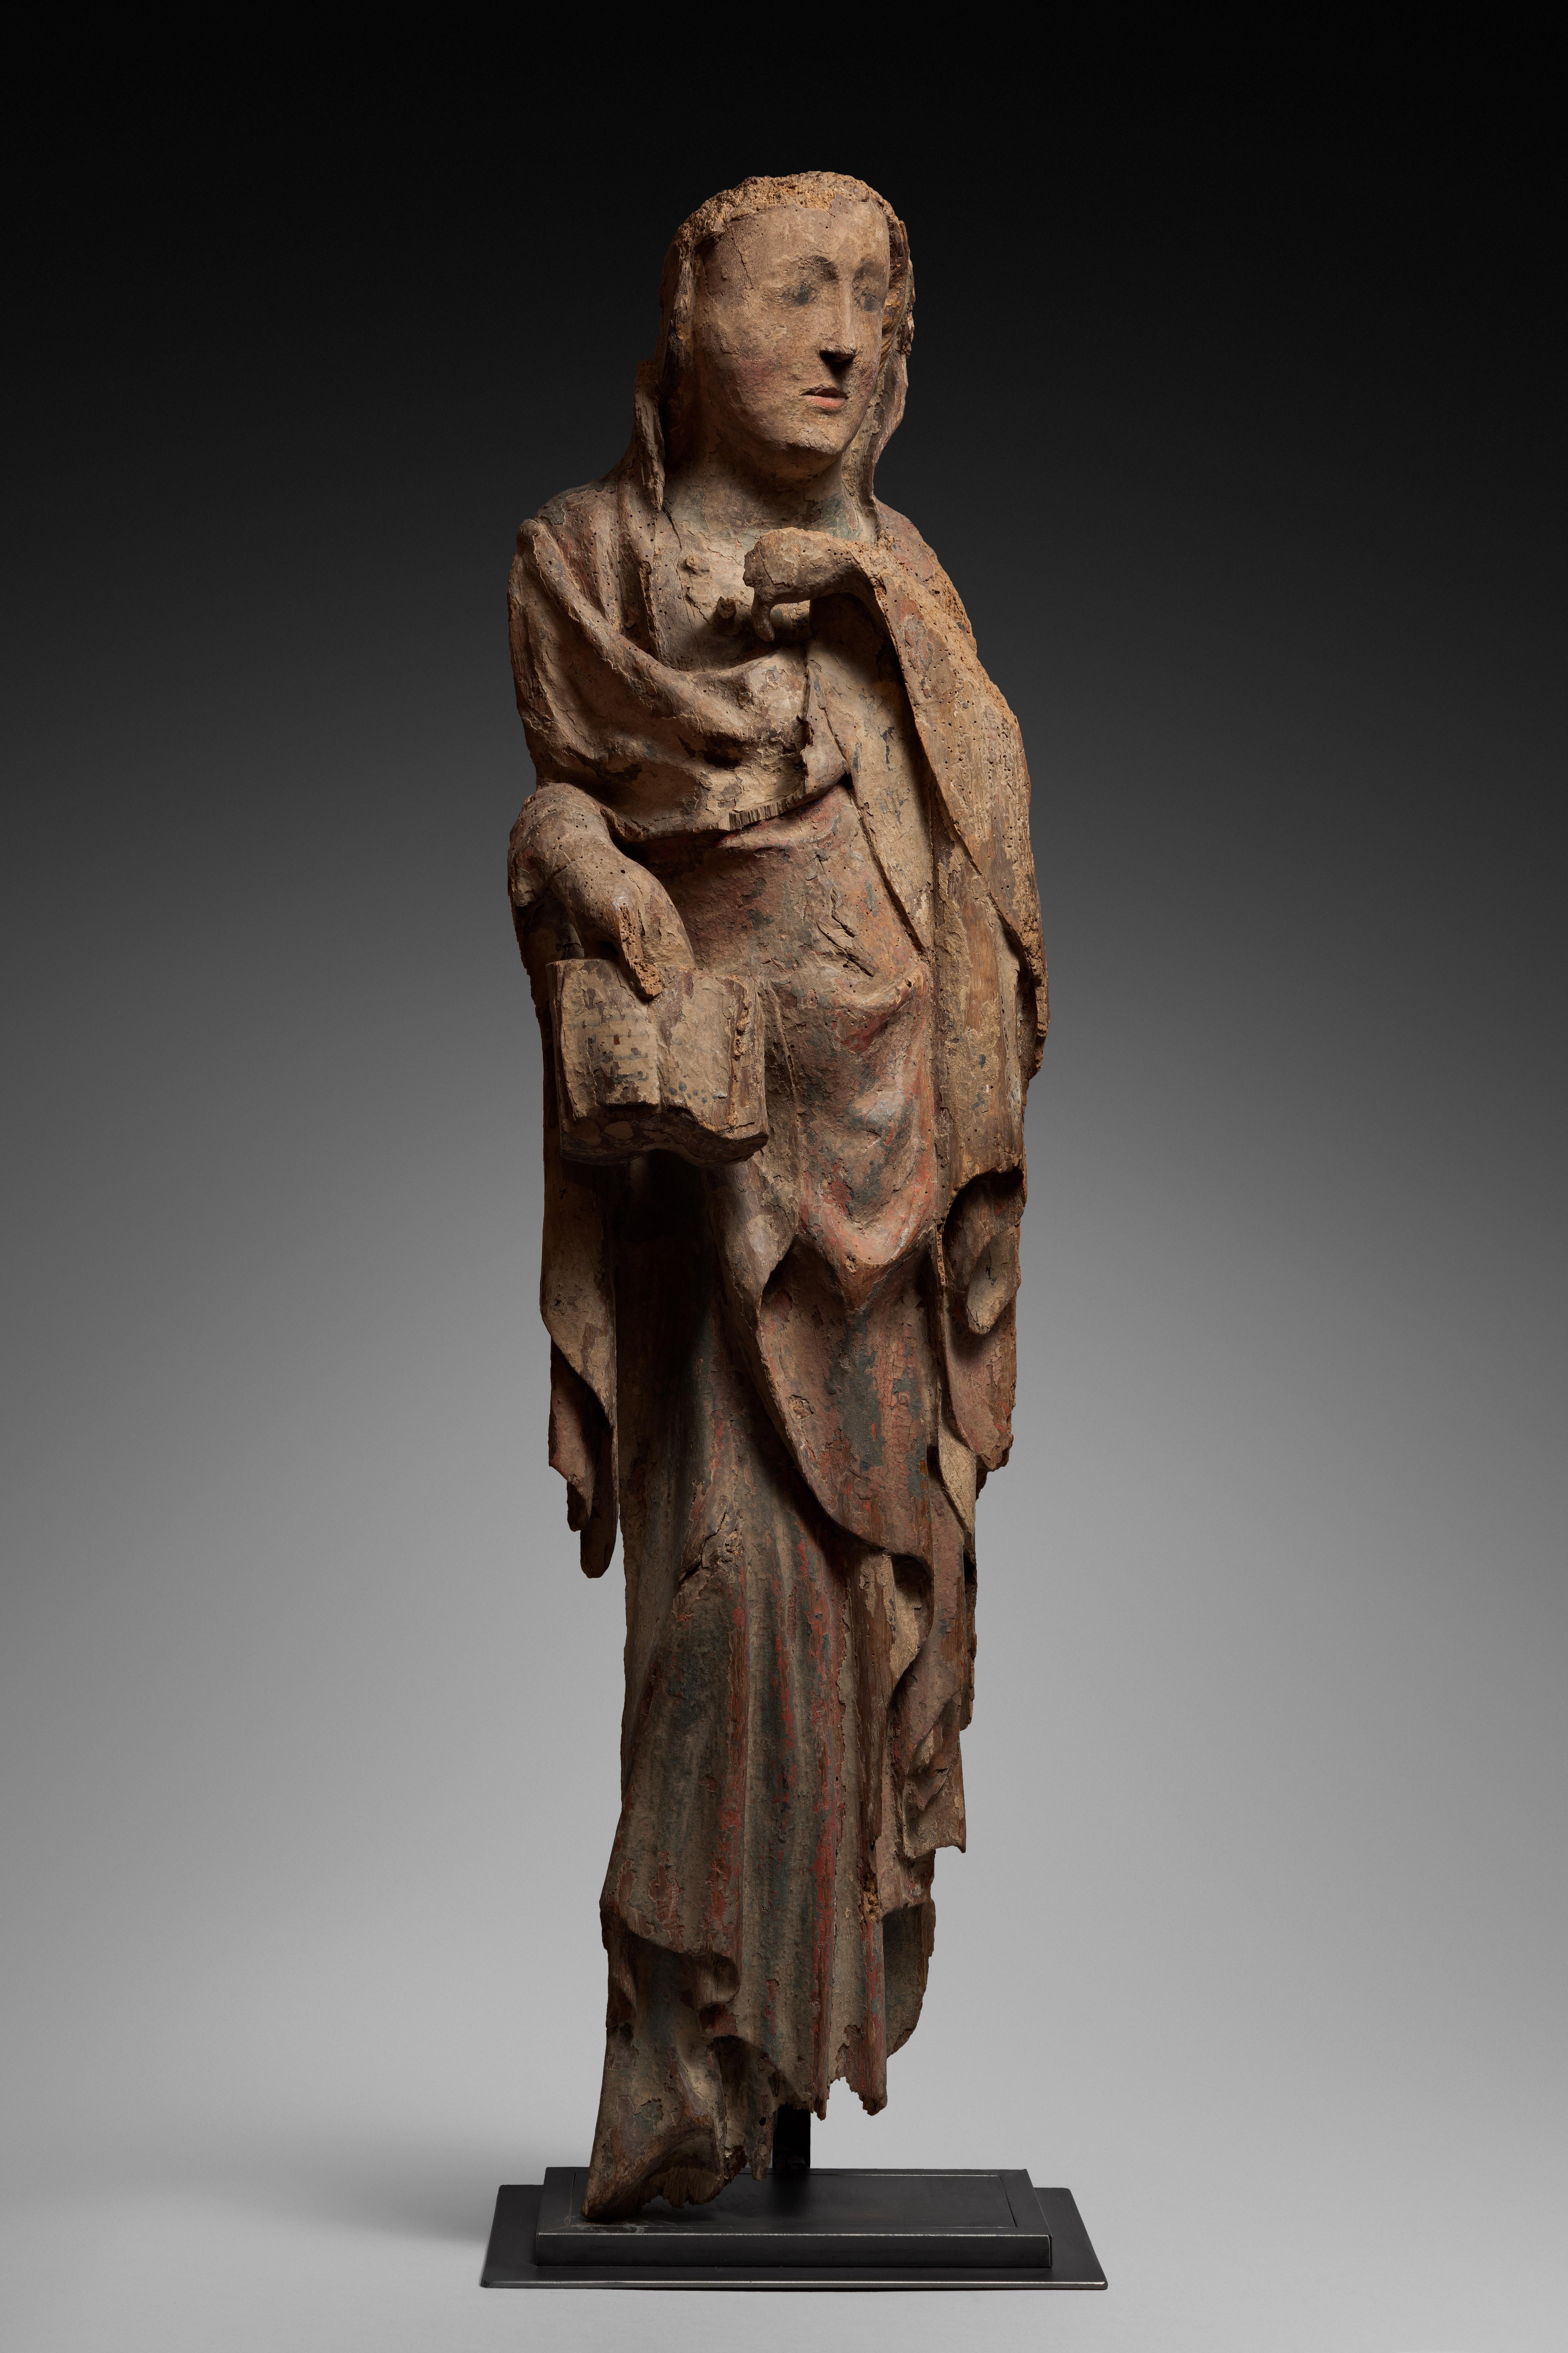 SAINT WOMAN IN POLYCHROME CARVED WOOD
 
ORIGIN : ITALY
PERIOD : late 13th century
 
Height : 103 cm
Length : 28  cm
Width : 16 cm
 Remains of polychromy
 
This holy woman is depicted in a perfectly frontal position.
Her attitude is still marked by